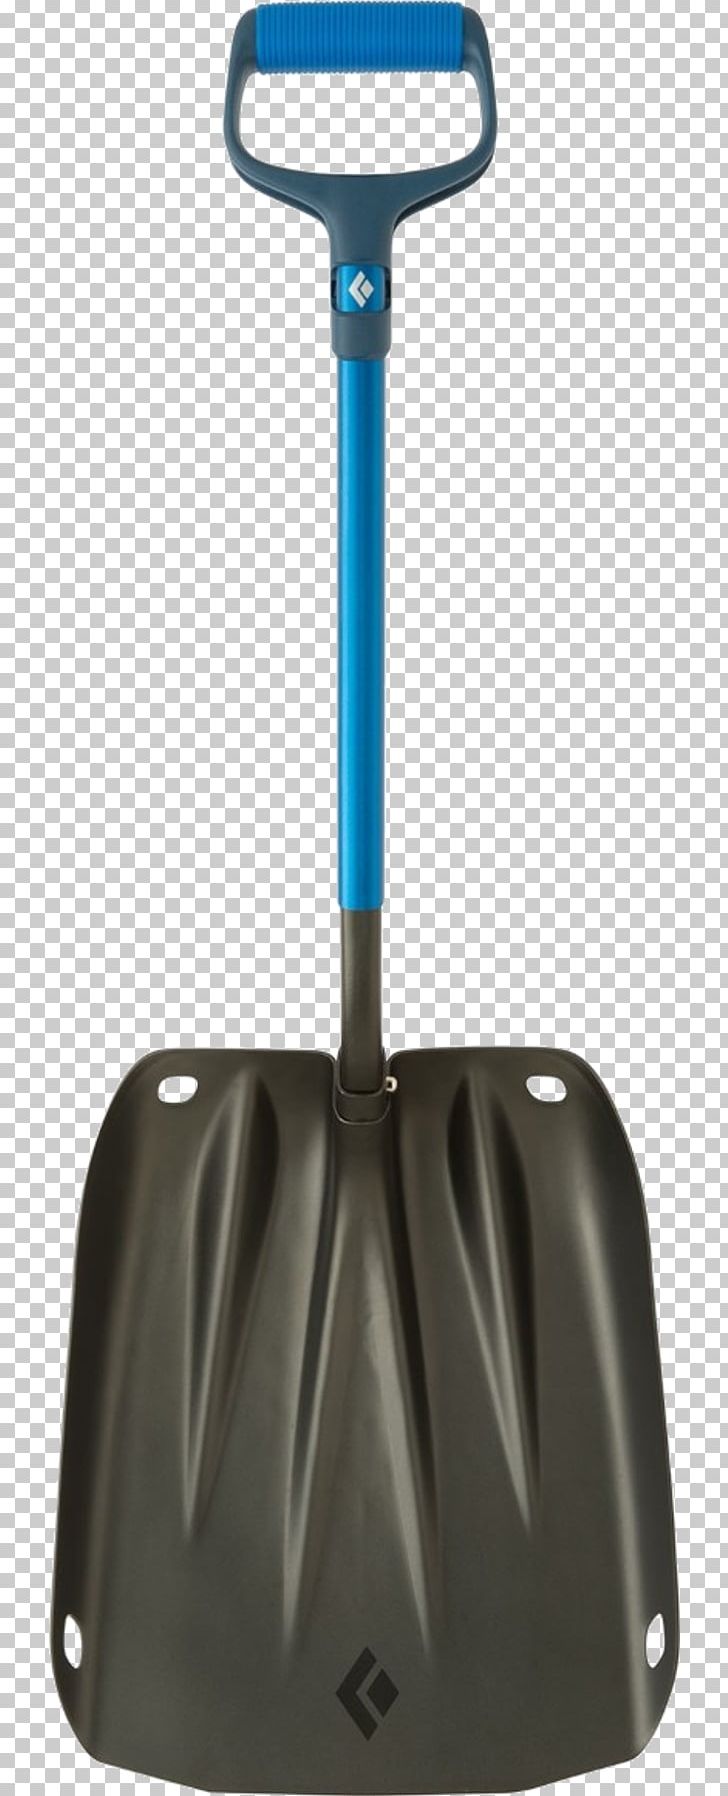 Black Diamond Equipment Backcountry Skiing Snow Shovel PNG, Clipart, Backcountrycom, Backpack, Black Diamond, Black Diamond Equipment, Diamond Free PNG Download